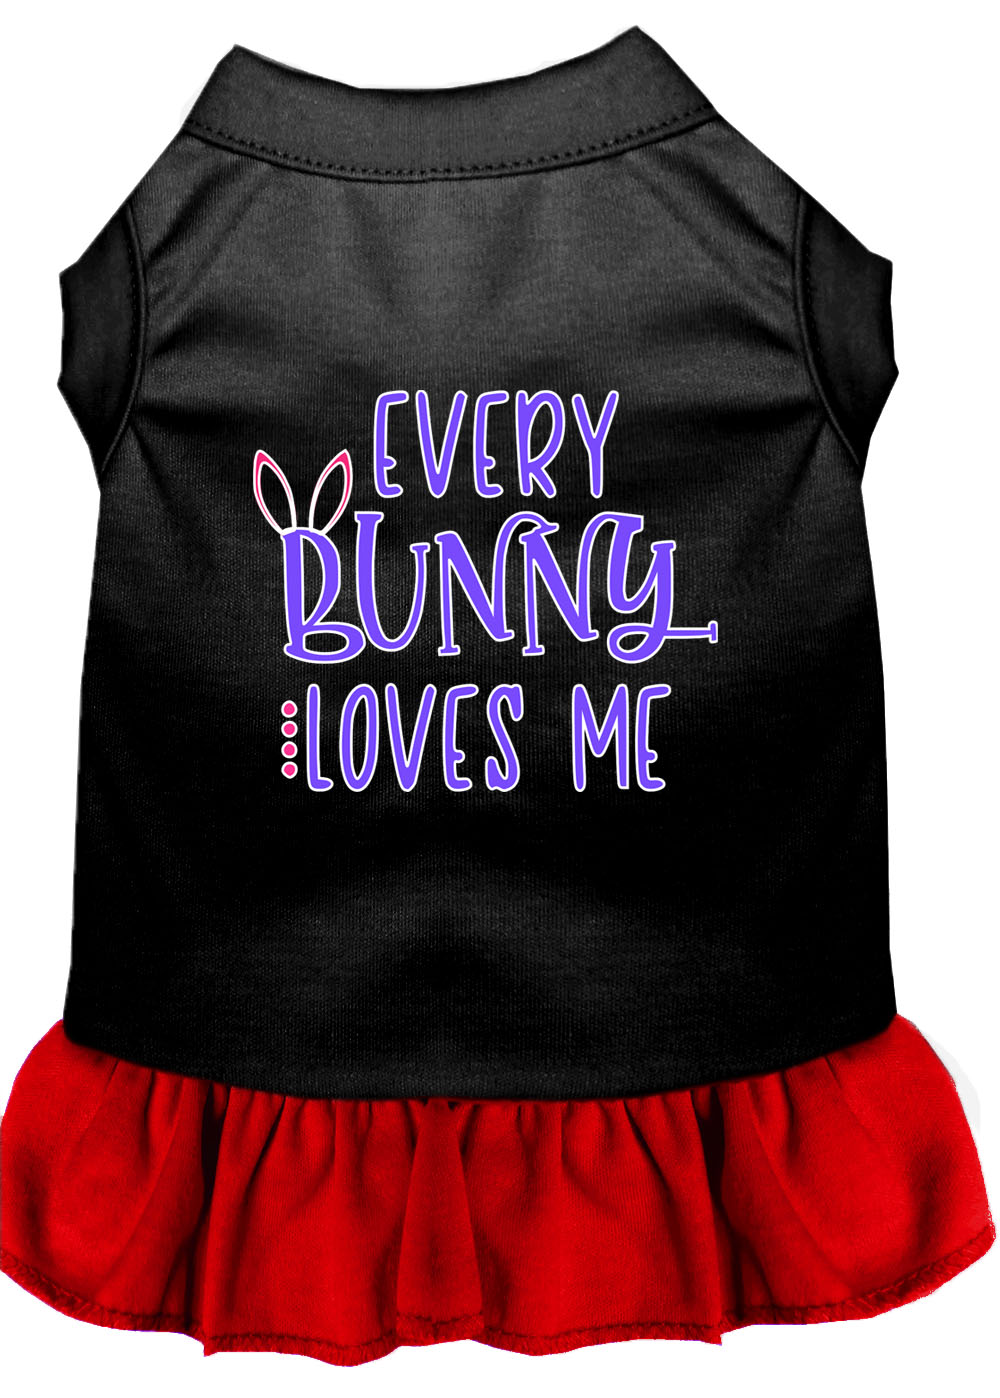 Every Bunny Loves me Screen Print Dog Dress Black with Red XL